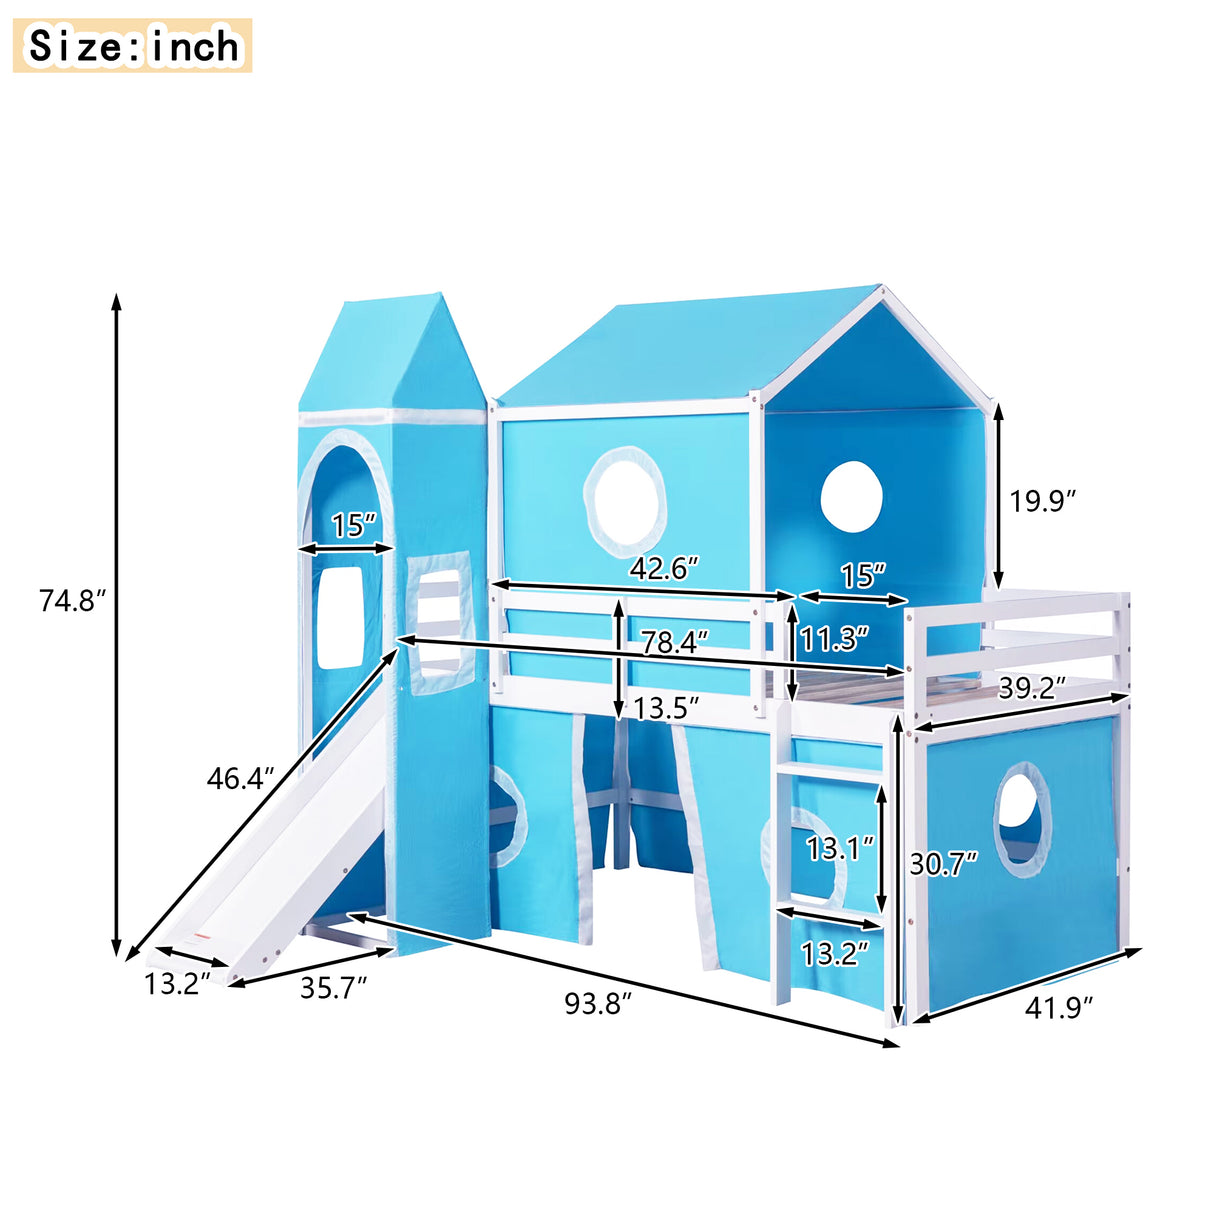 Twin Size Bunk Bed with Slide Blue Tent and Tower - Blue - Home Elegance USA